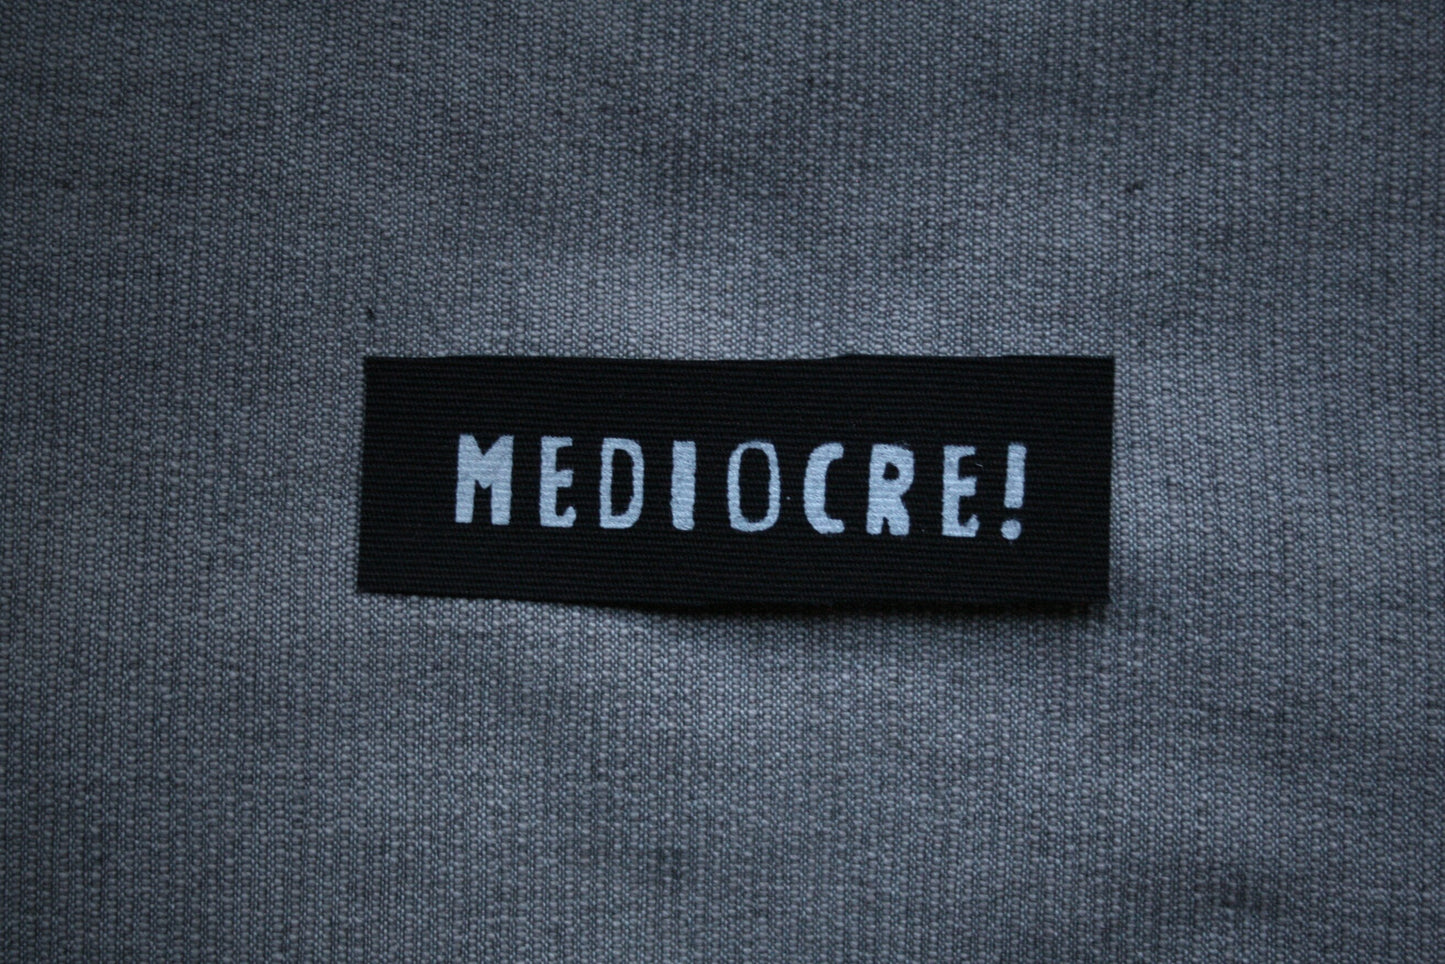 MEDIOCRE - screen printed PATCH